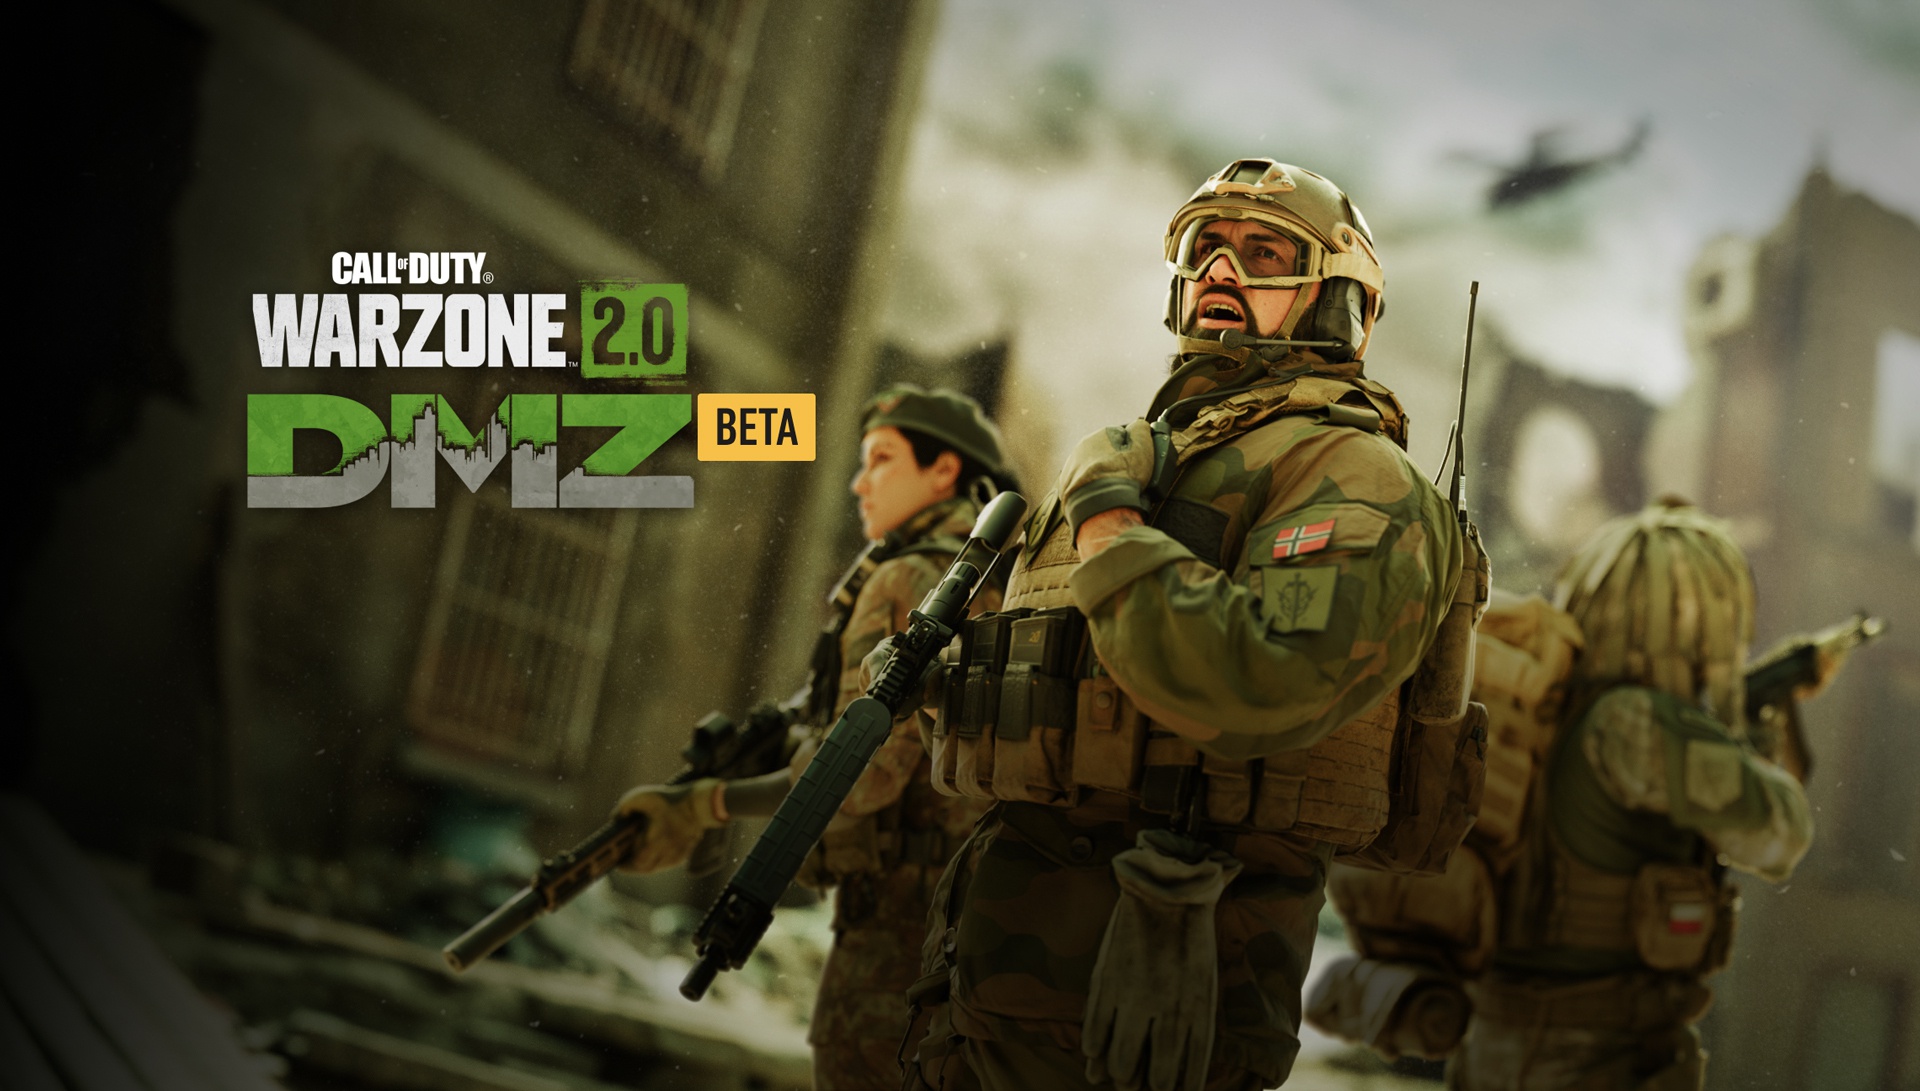 Call of Duty: Warzone 2.0 Welcomes Players to DMZ Beta; Modern Warfare 2 may launch Customizable Kill Cams and More